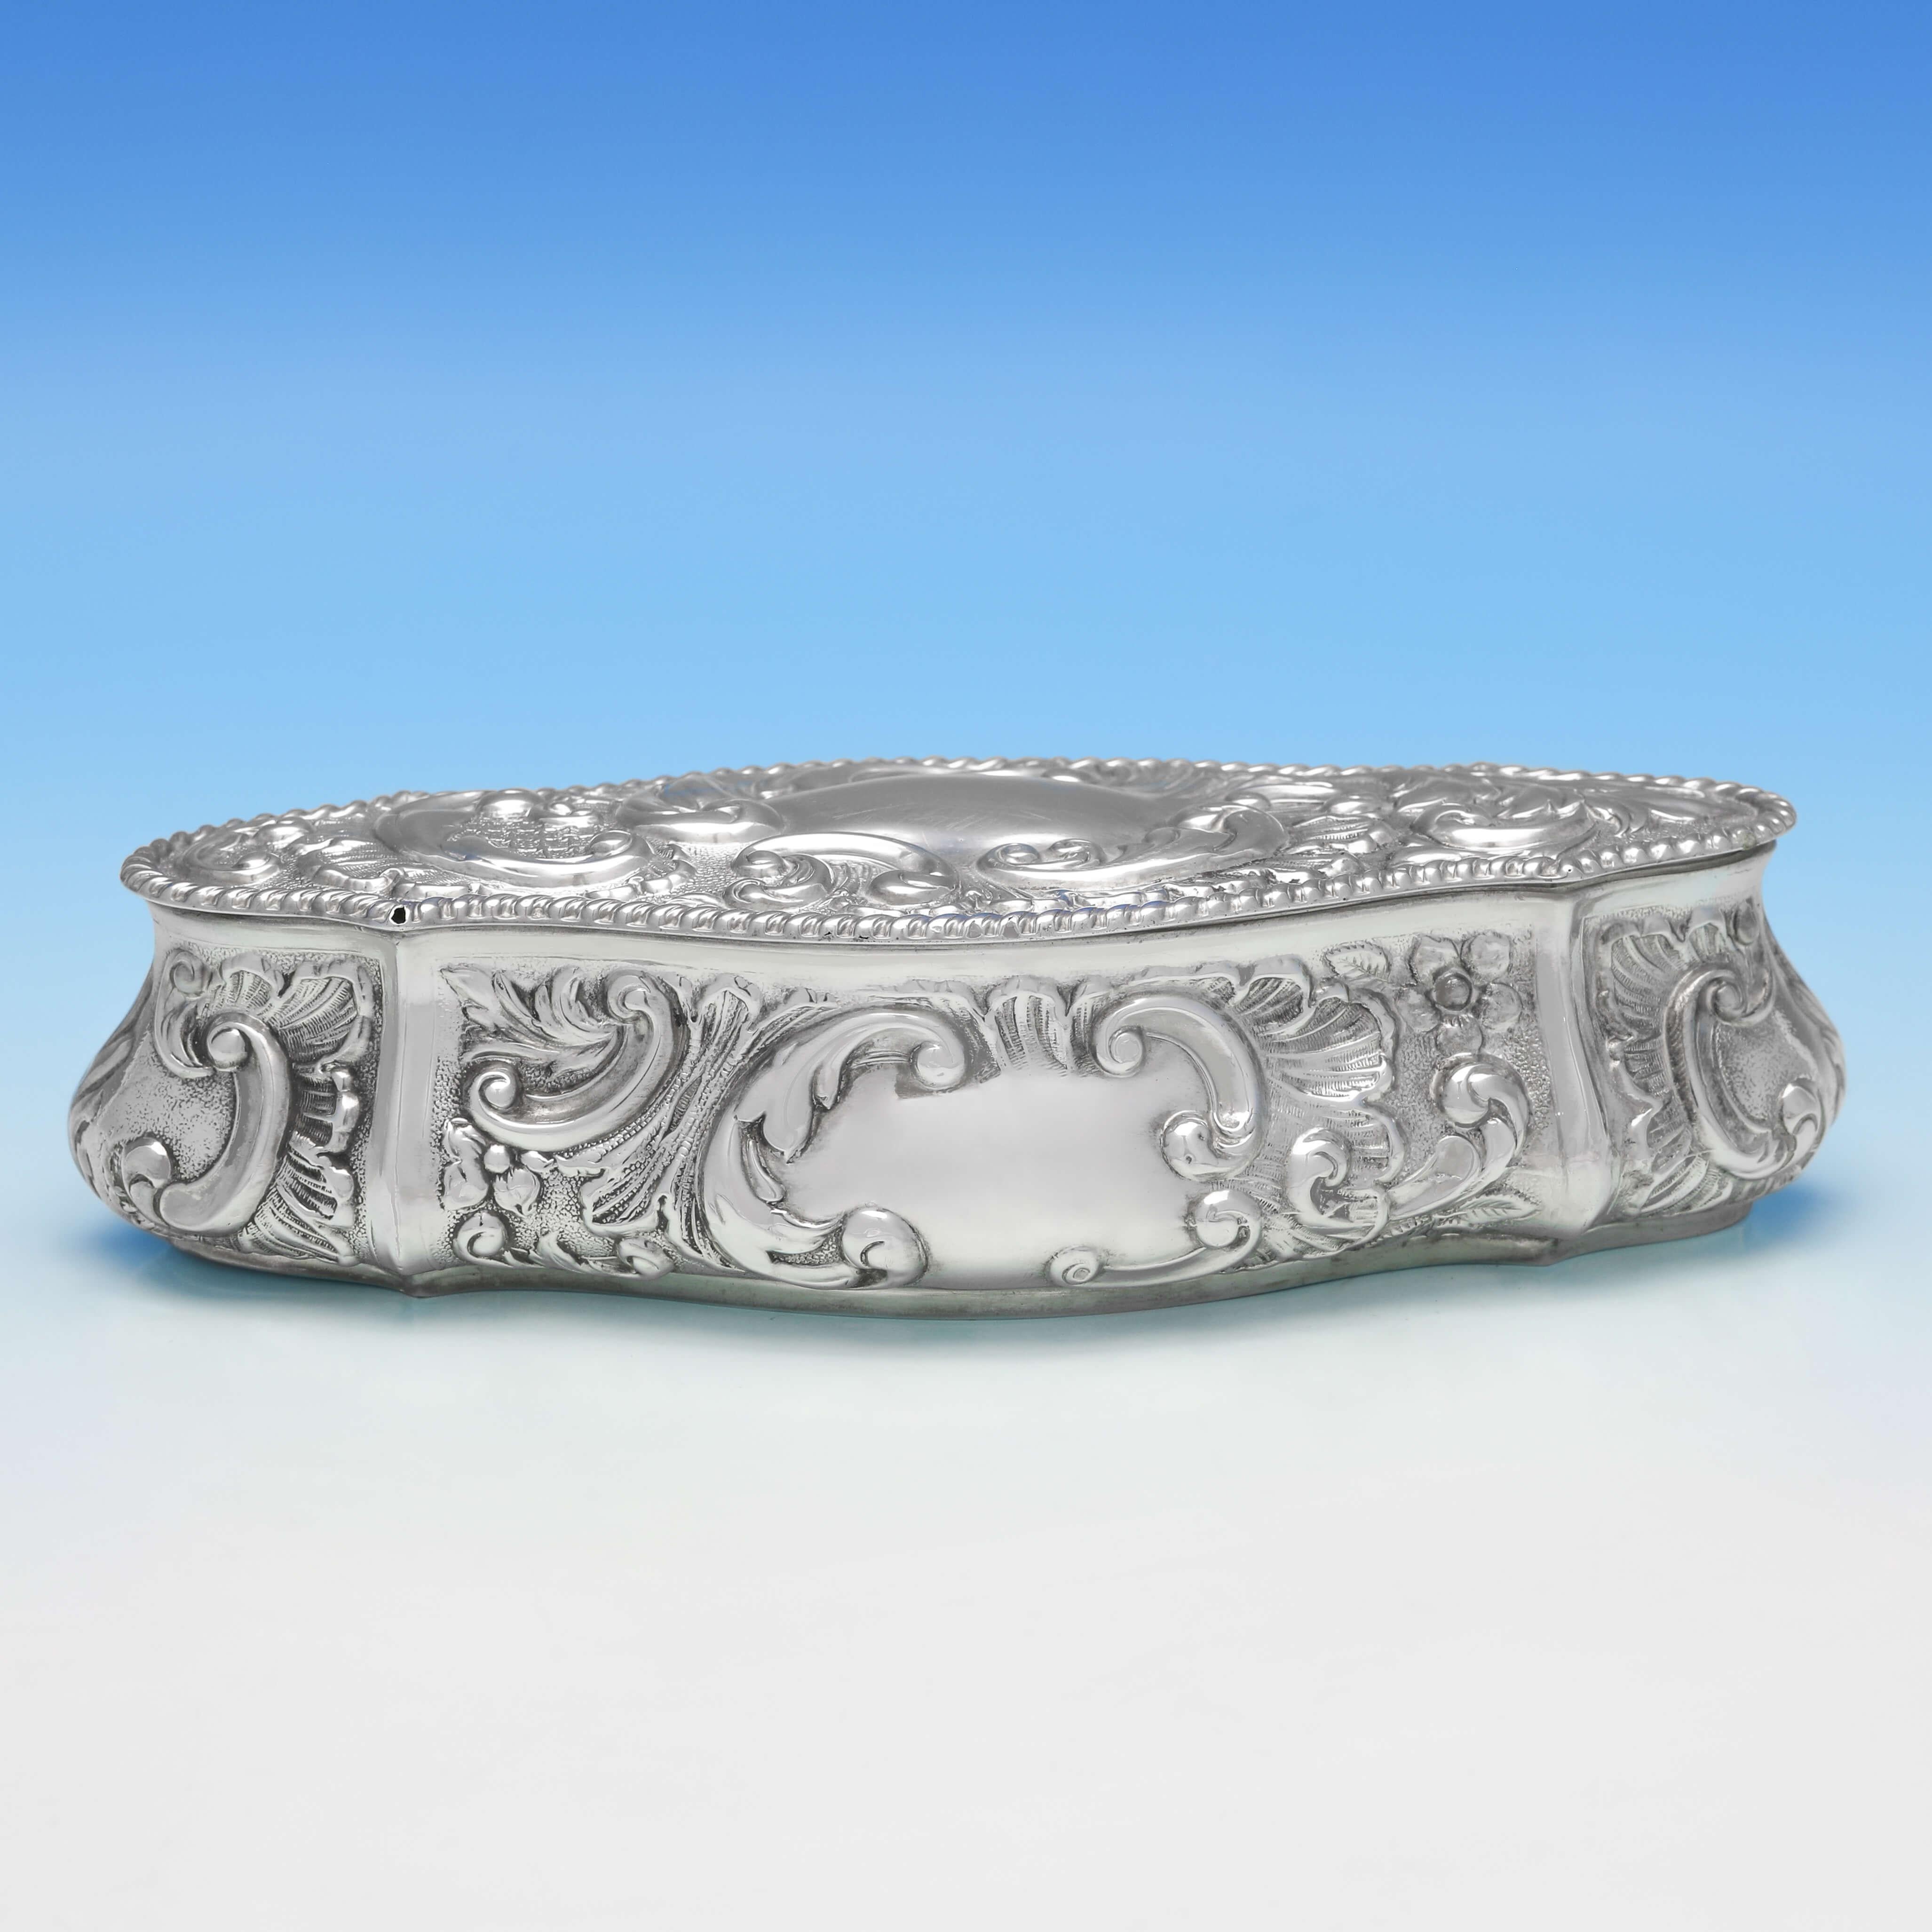 English Art Nouveau Edwardian Antique Sterling Silver Trinket Box from Chester, 1904